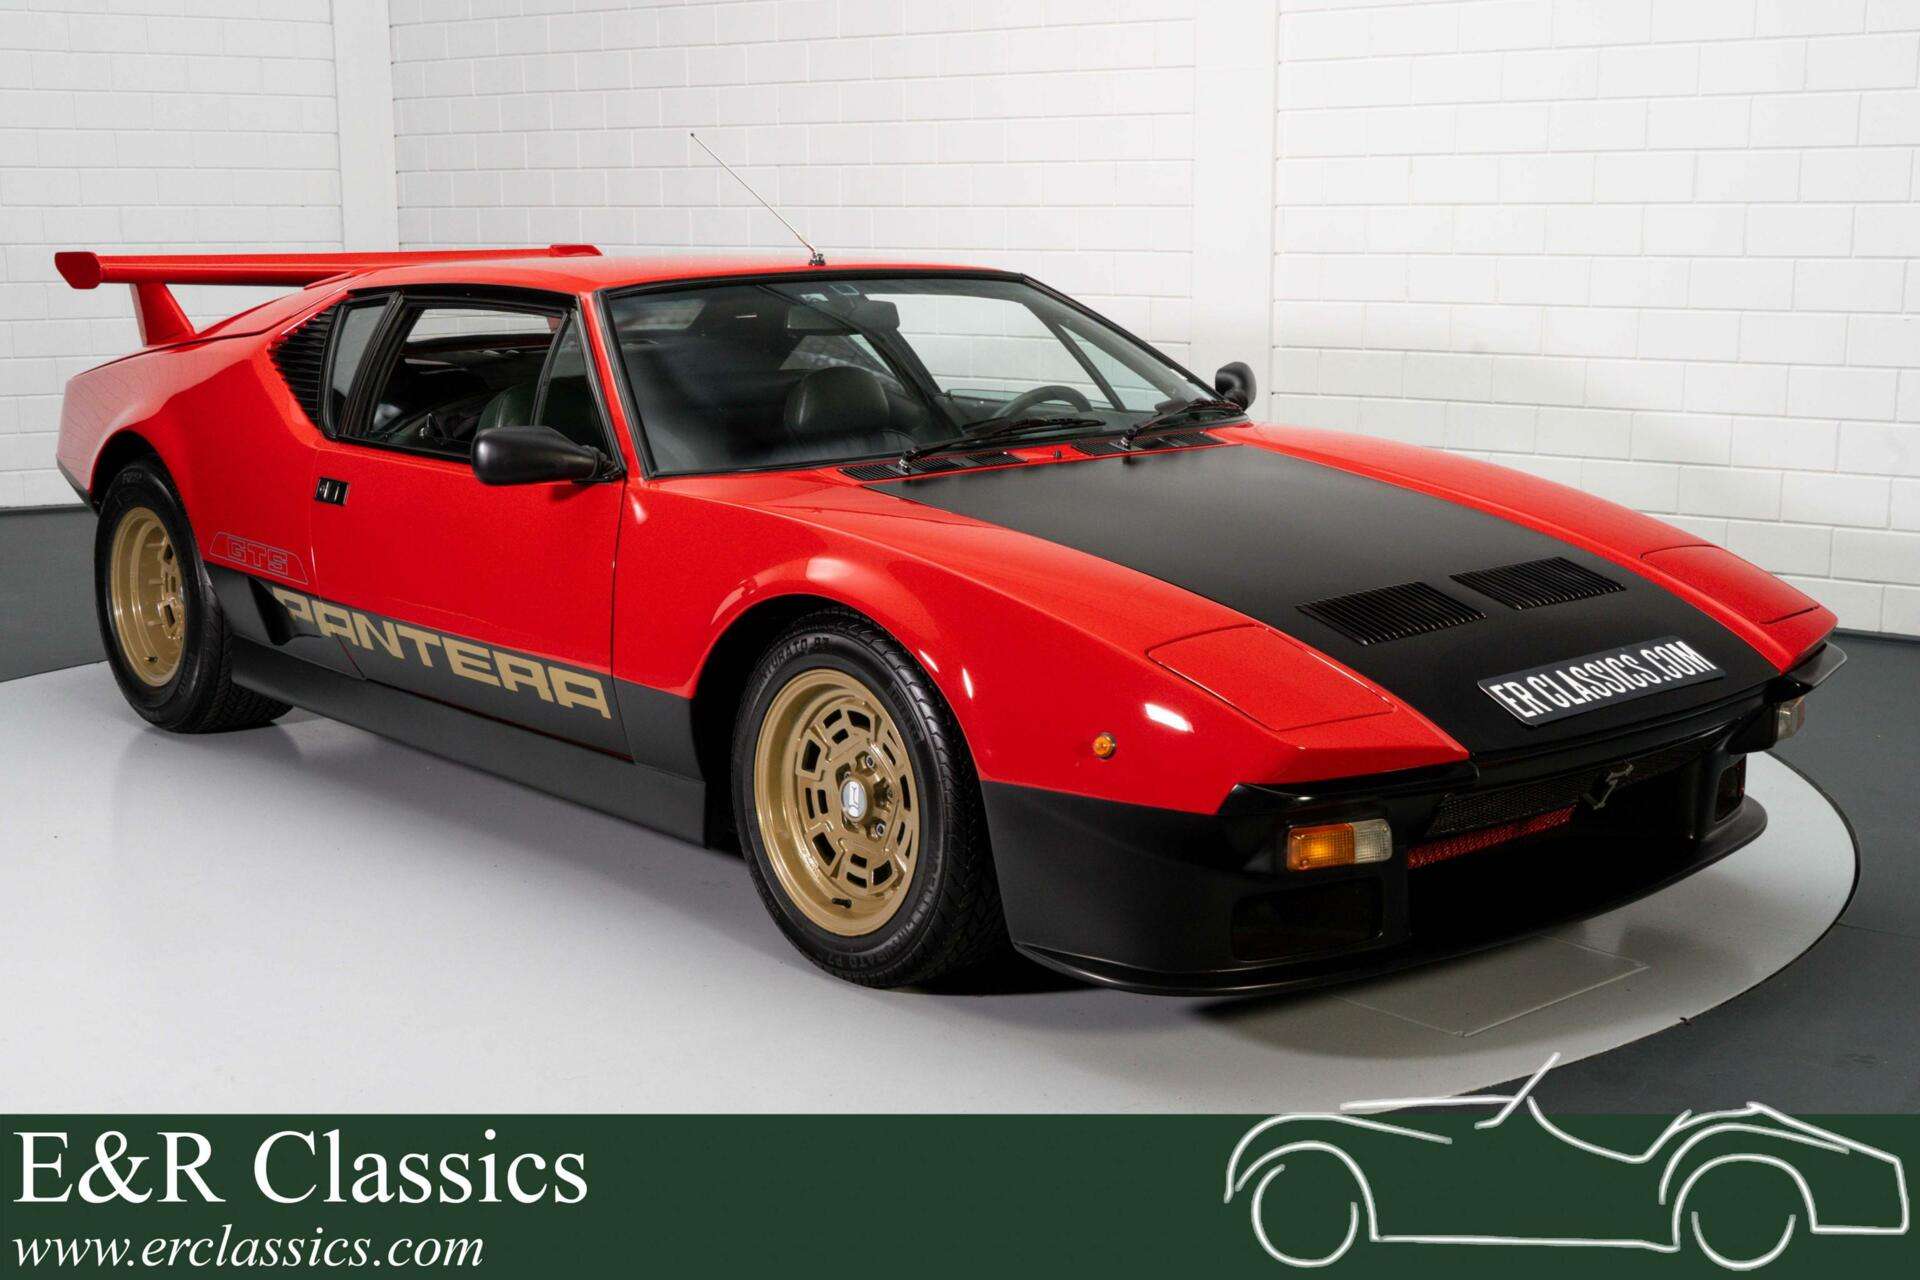 De Tomaso Pantera Coupe in Red antique / classic in WAALWIJK for € 139,950.-